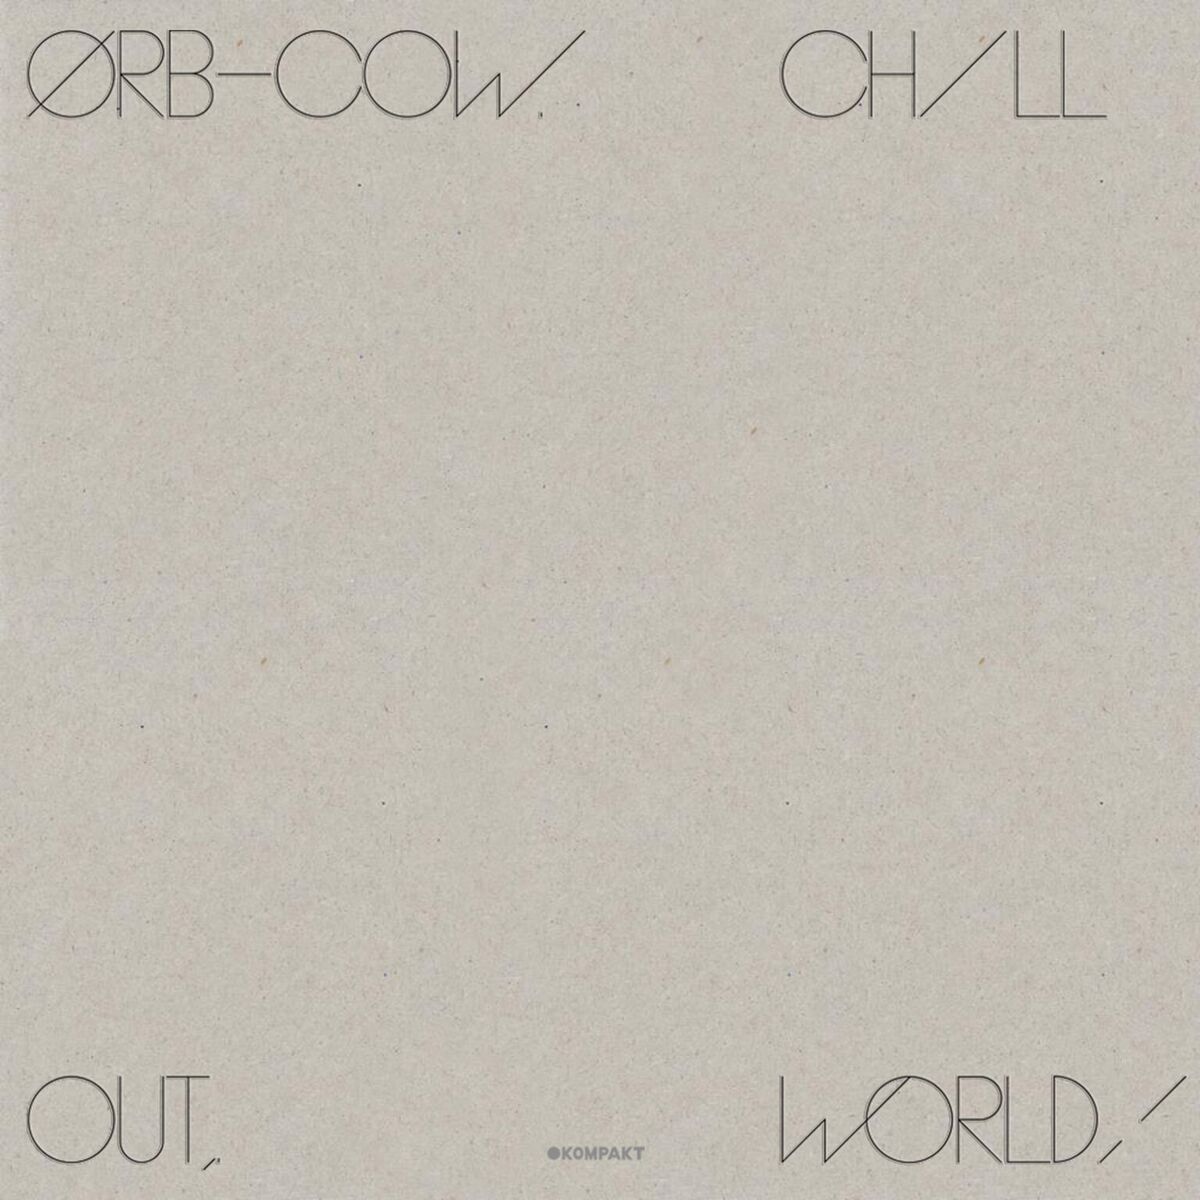 The Orb – COW / CHILL OUT, WORLD!, VÖ: 14.10.2016